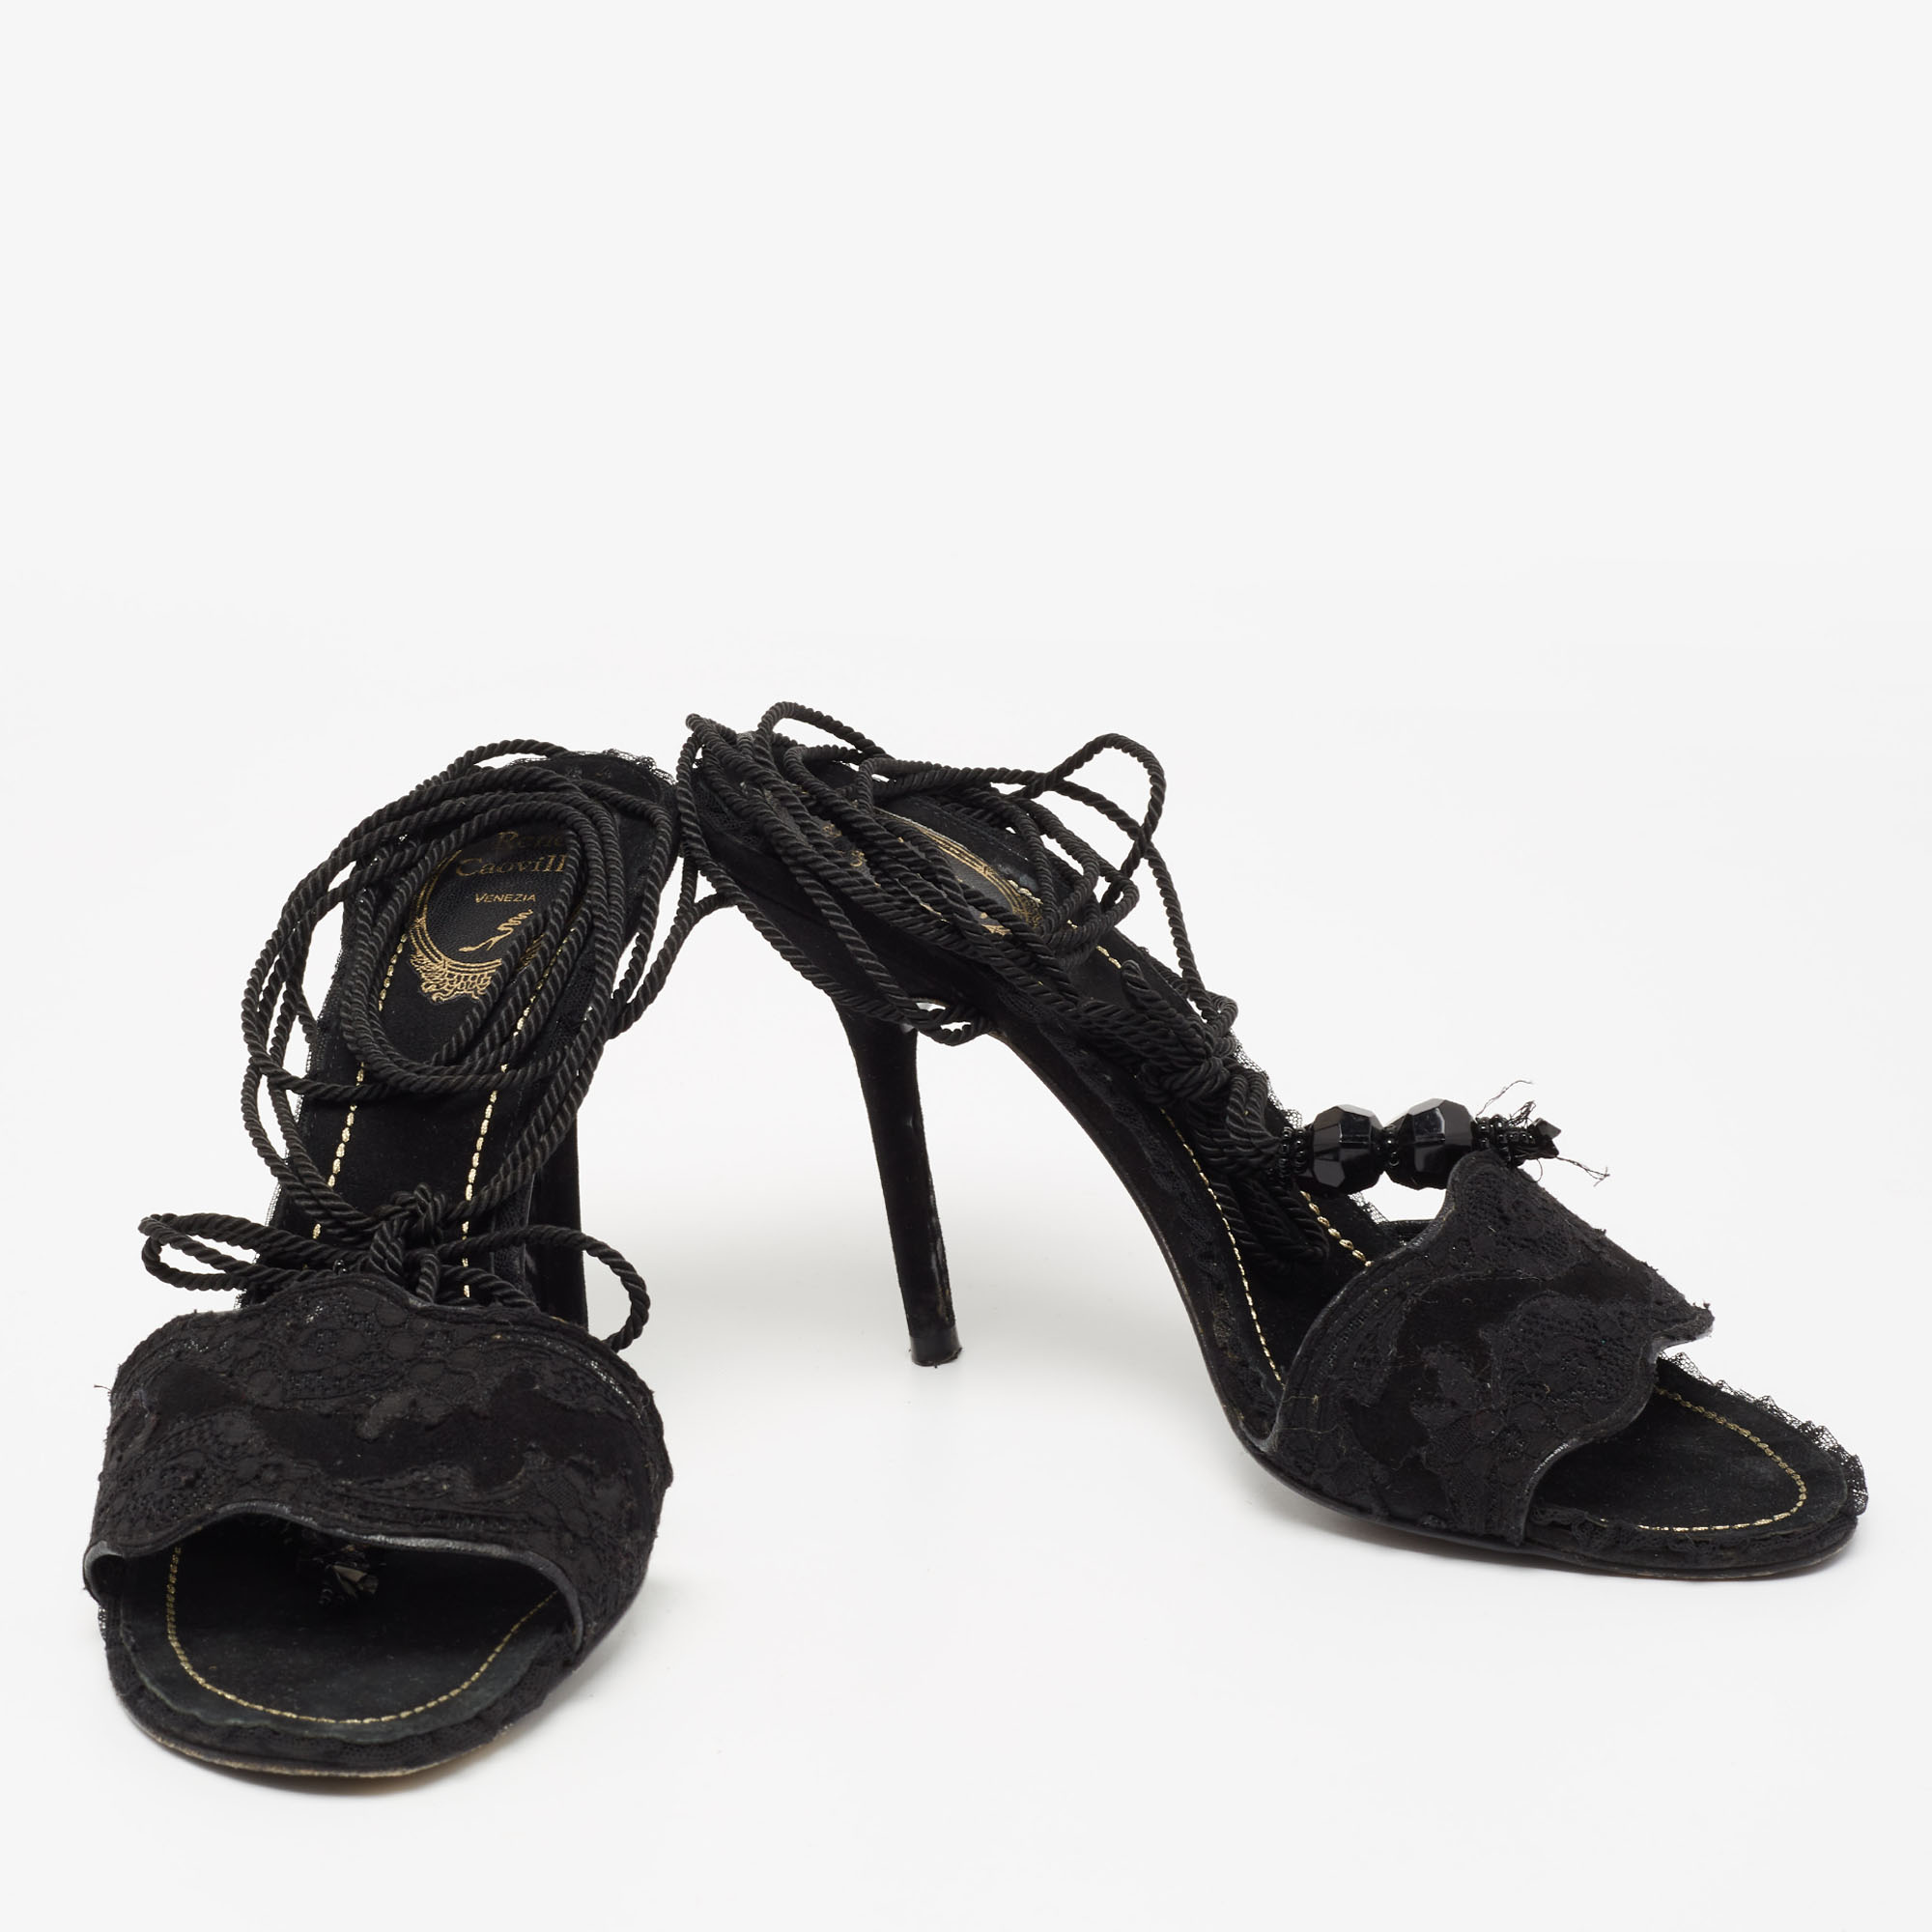 René Caovilla Black Suede And Lace Embellished Ankle Tie Sandals Size 38.5